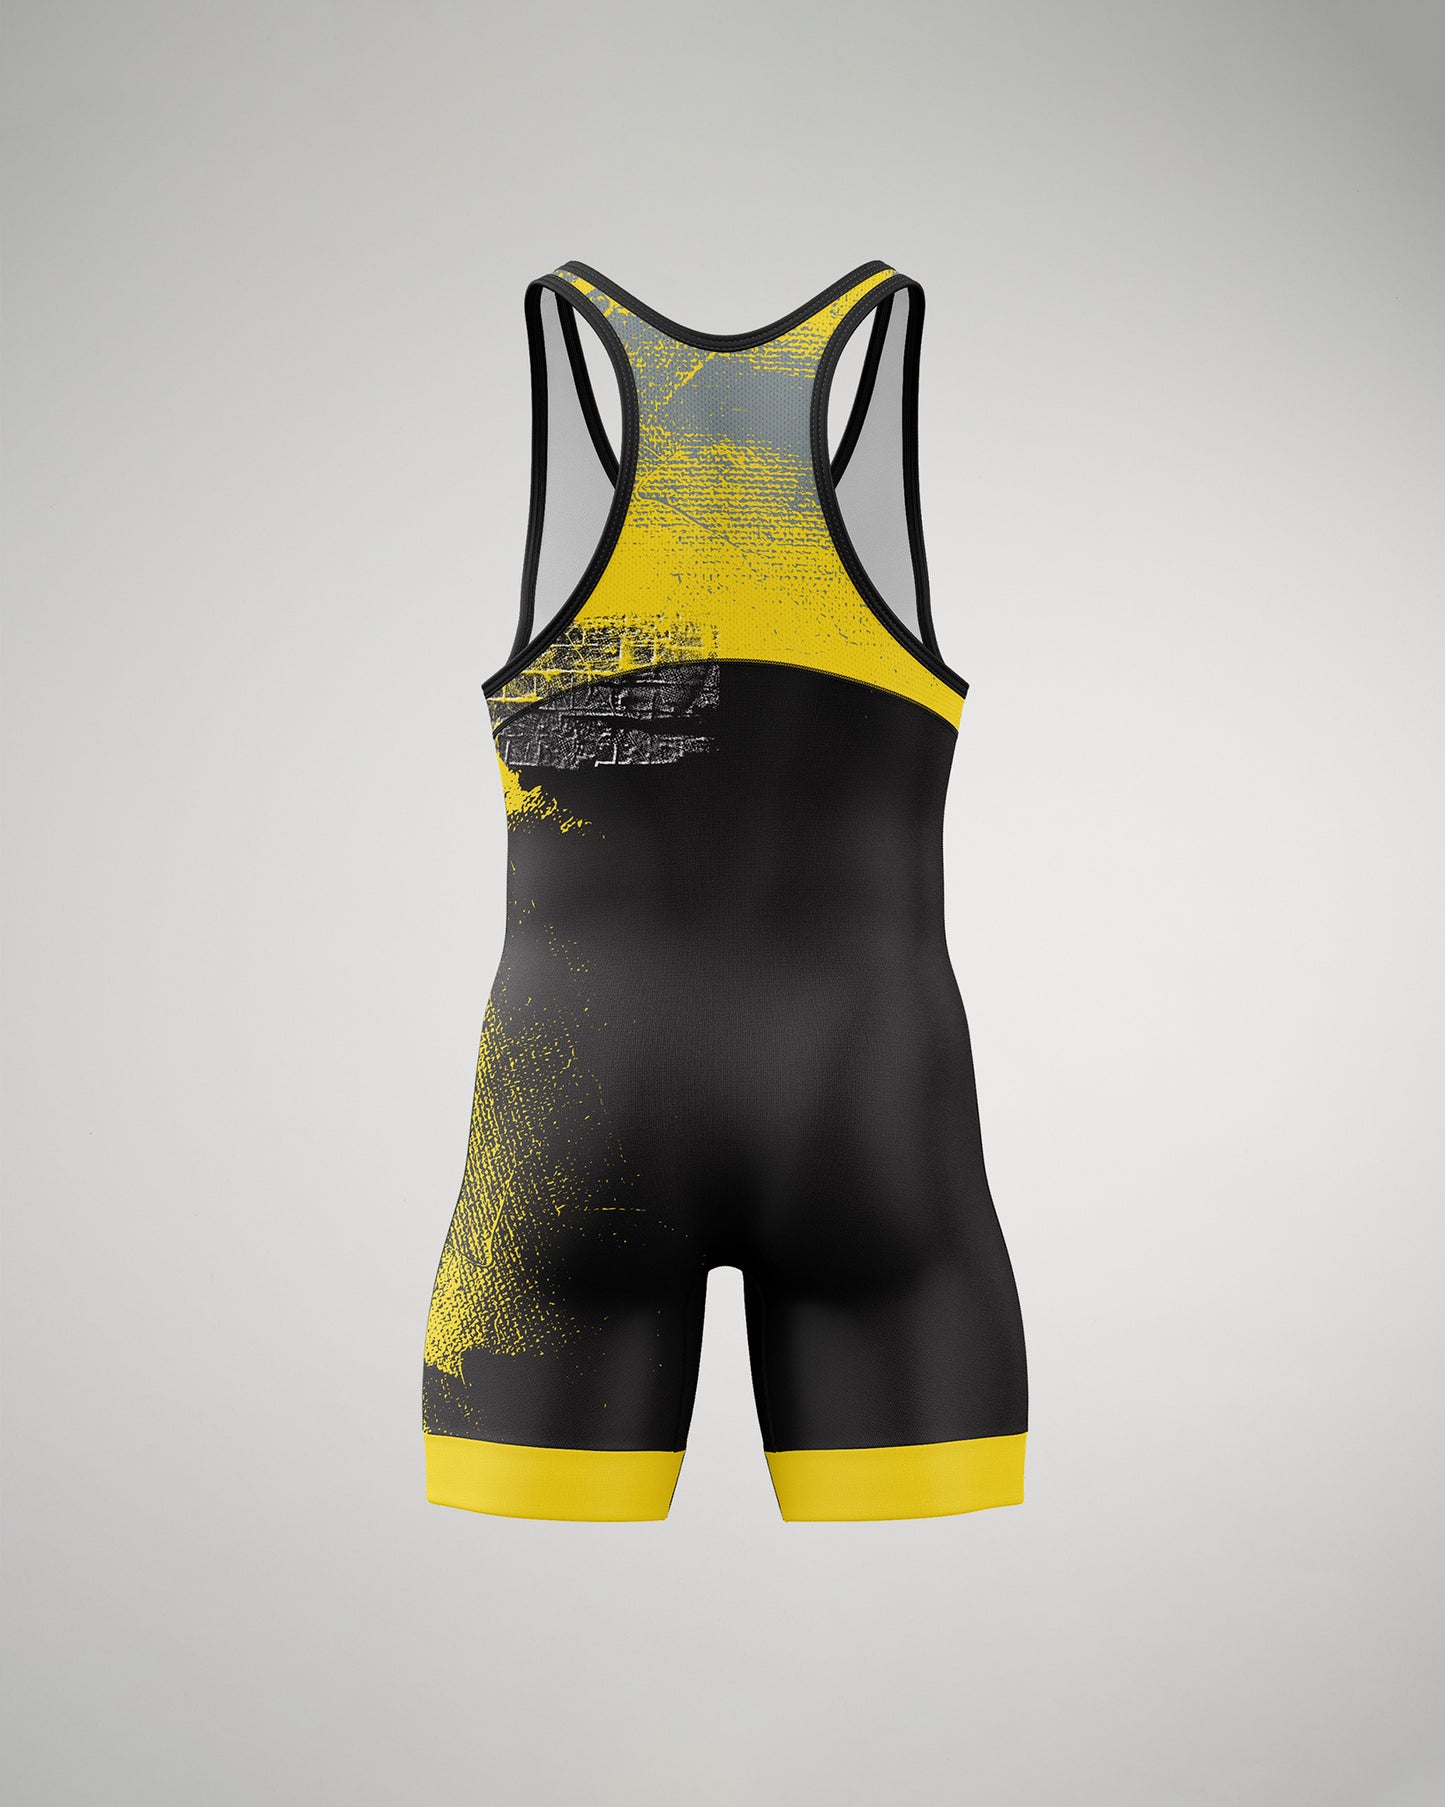 A Way of Life Controlled Chaos Elite 2.0 Singlet